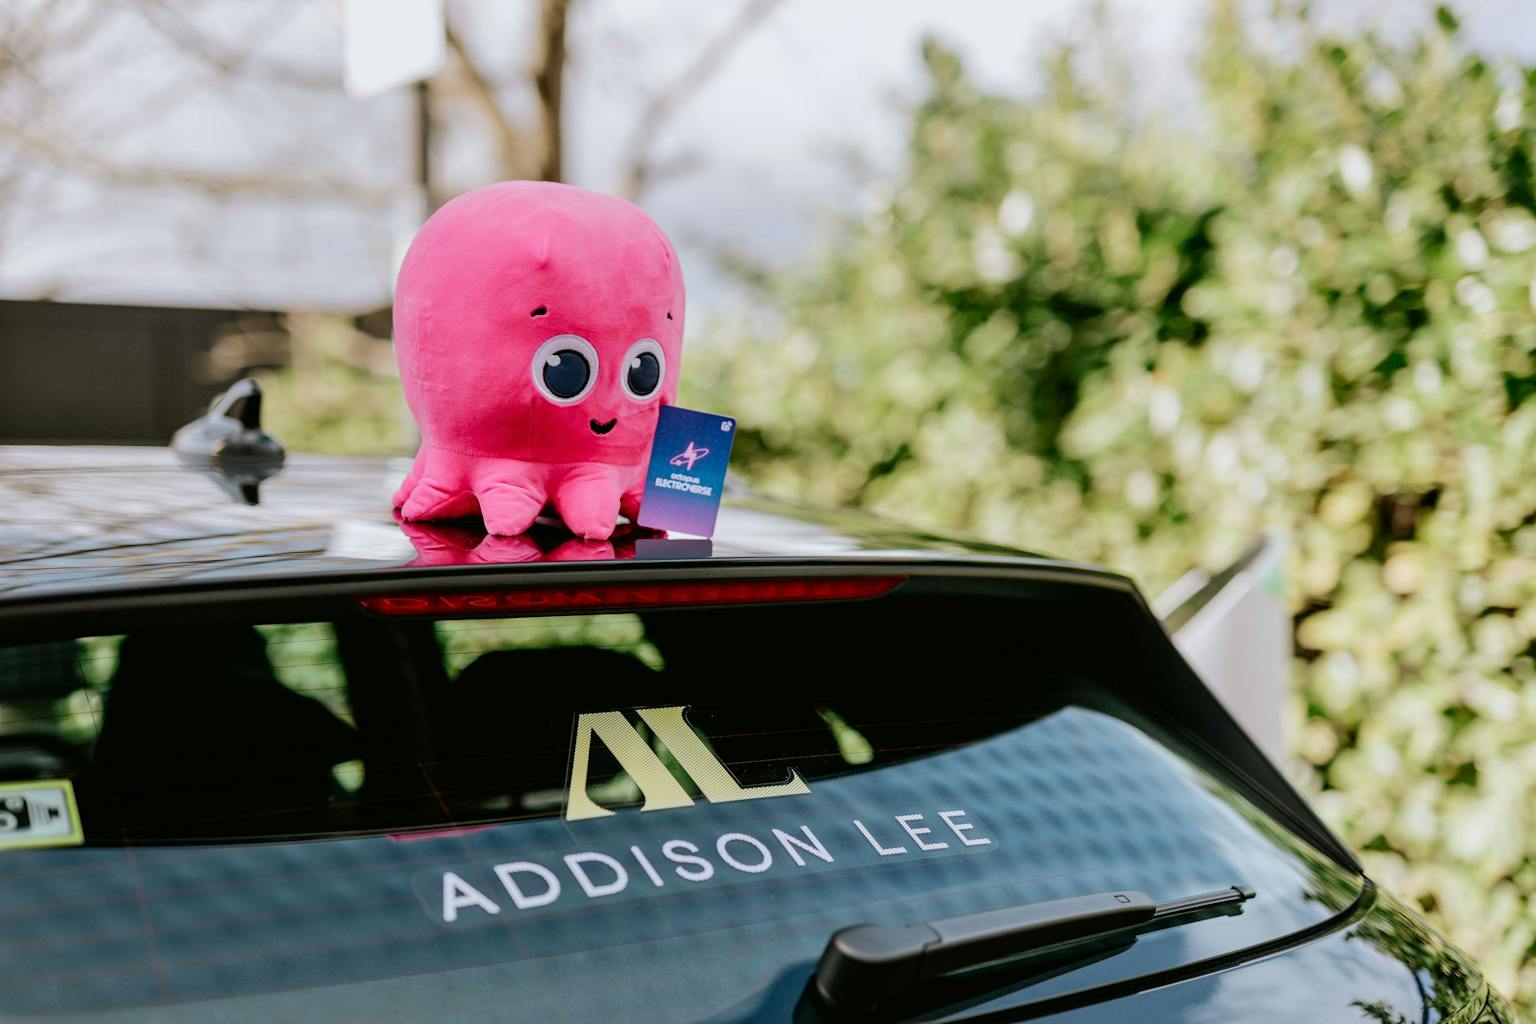 Octopus Energy mascot, Constantine, sits on top of Addsion Lee taxi holding an Octopus Electroverse charging card